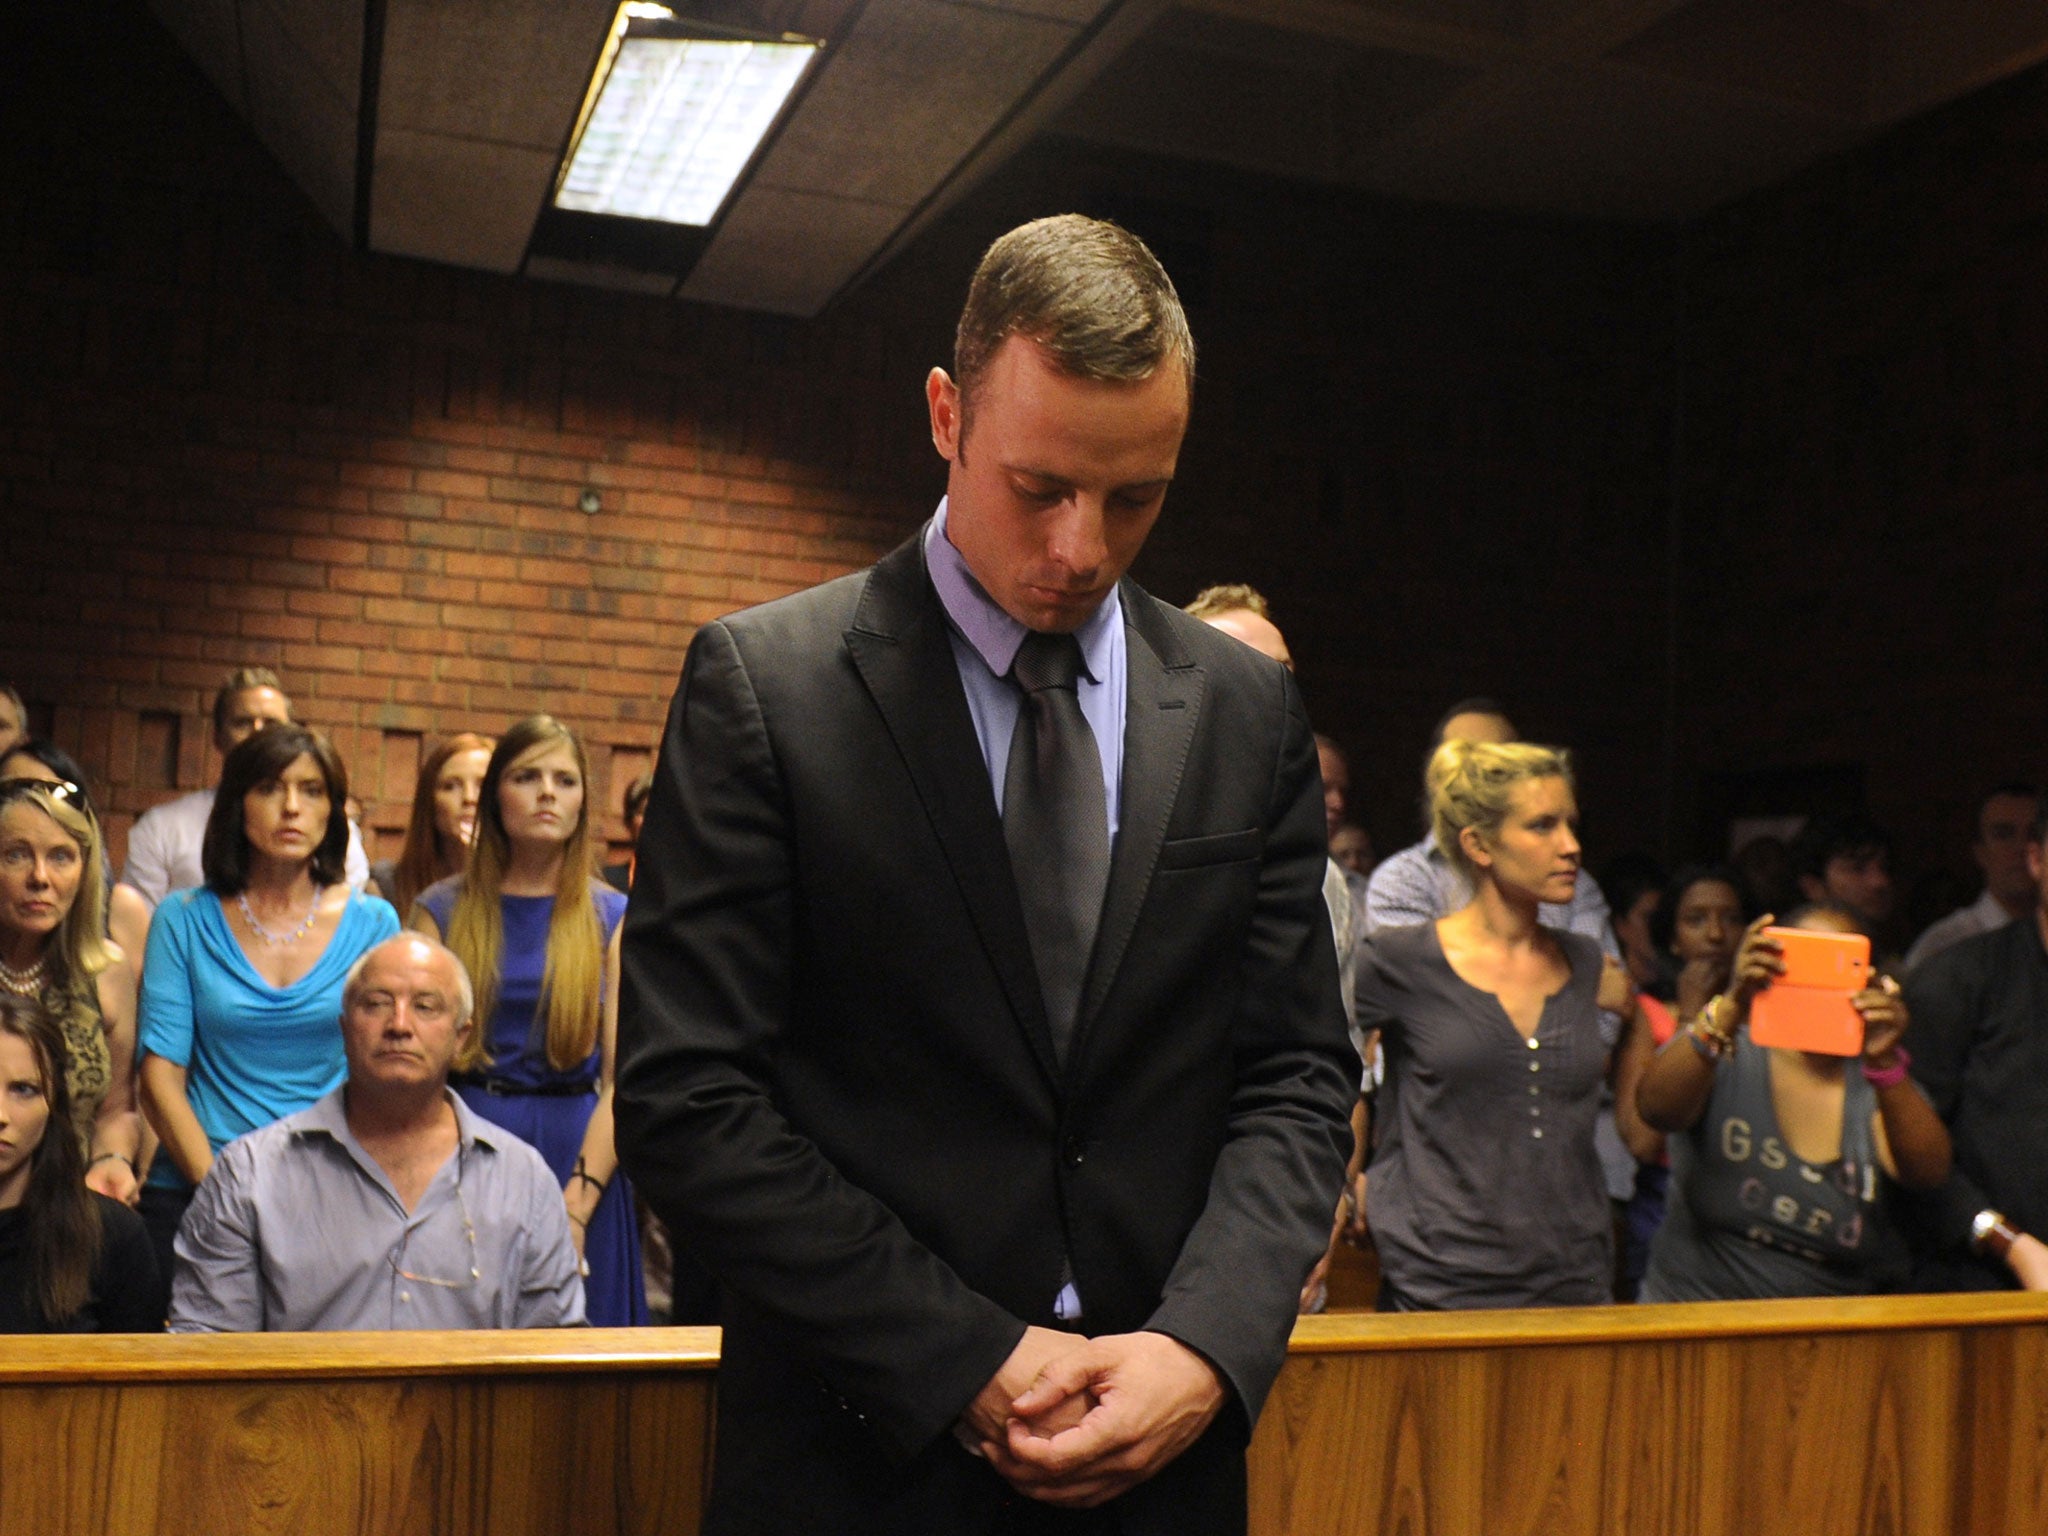 South African Olympic sprinter Oscar Pistorius appears on February 21, 2013 at the Magistrate Court in Pretoria.